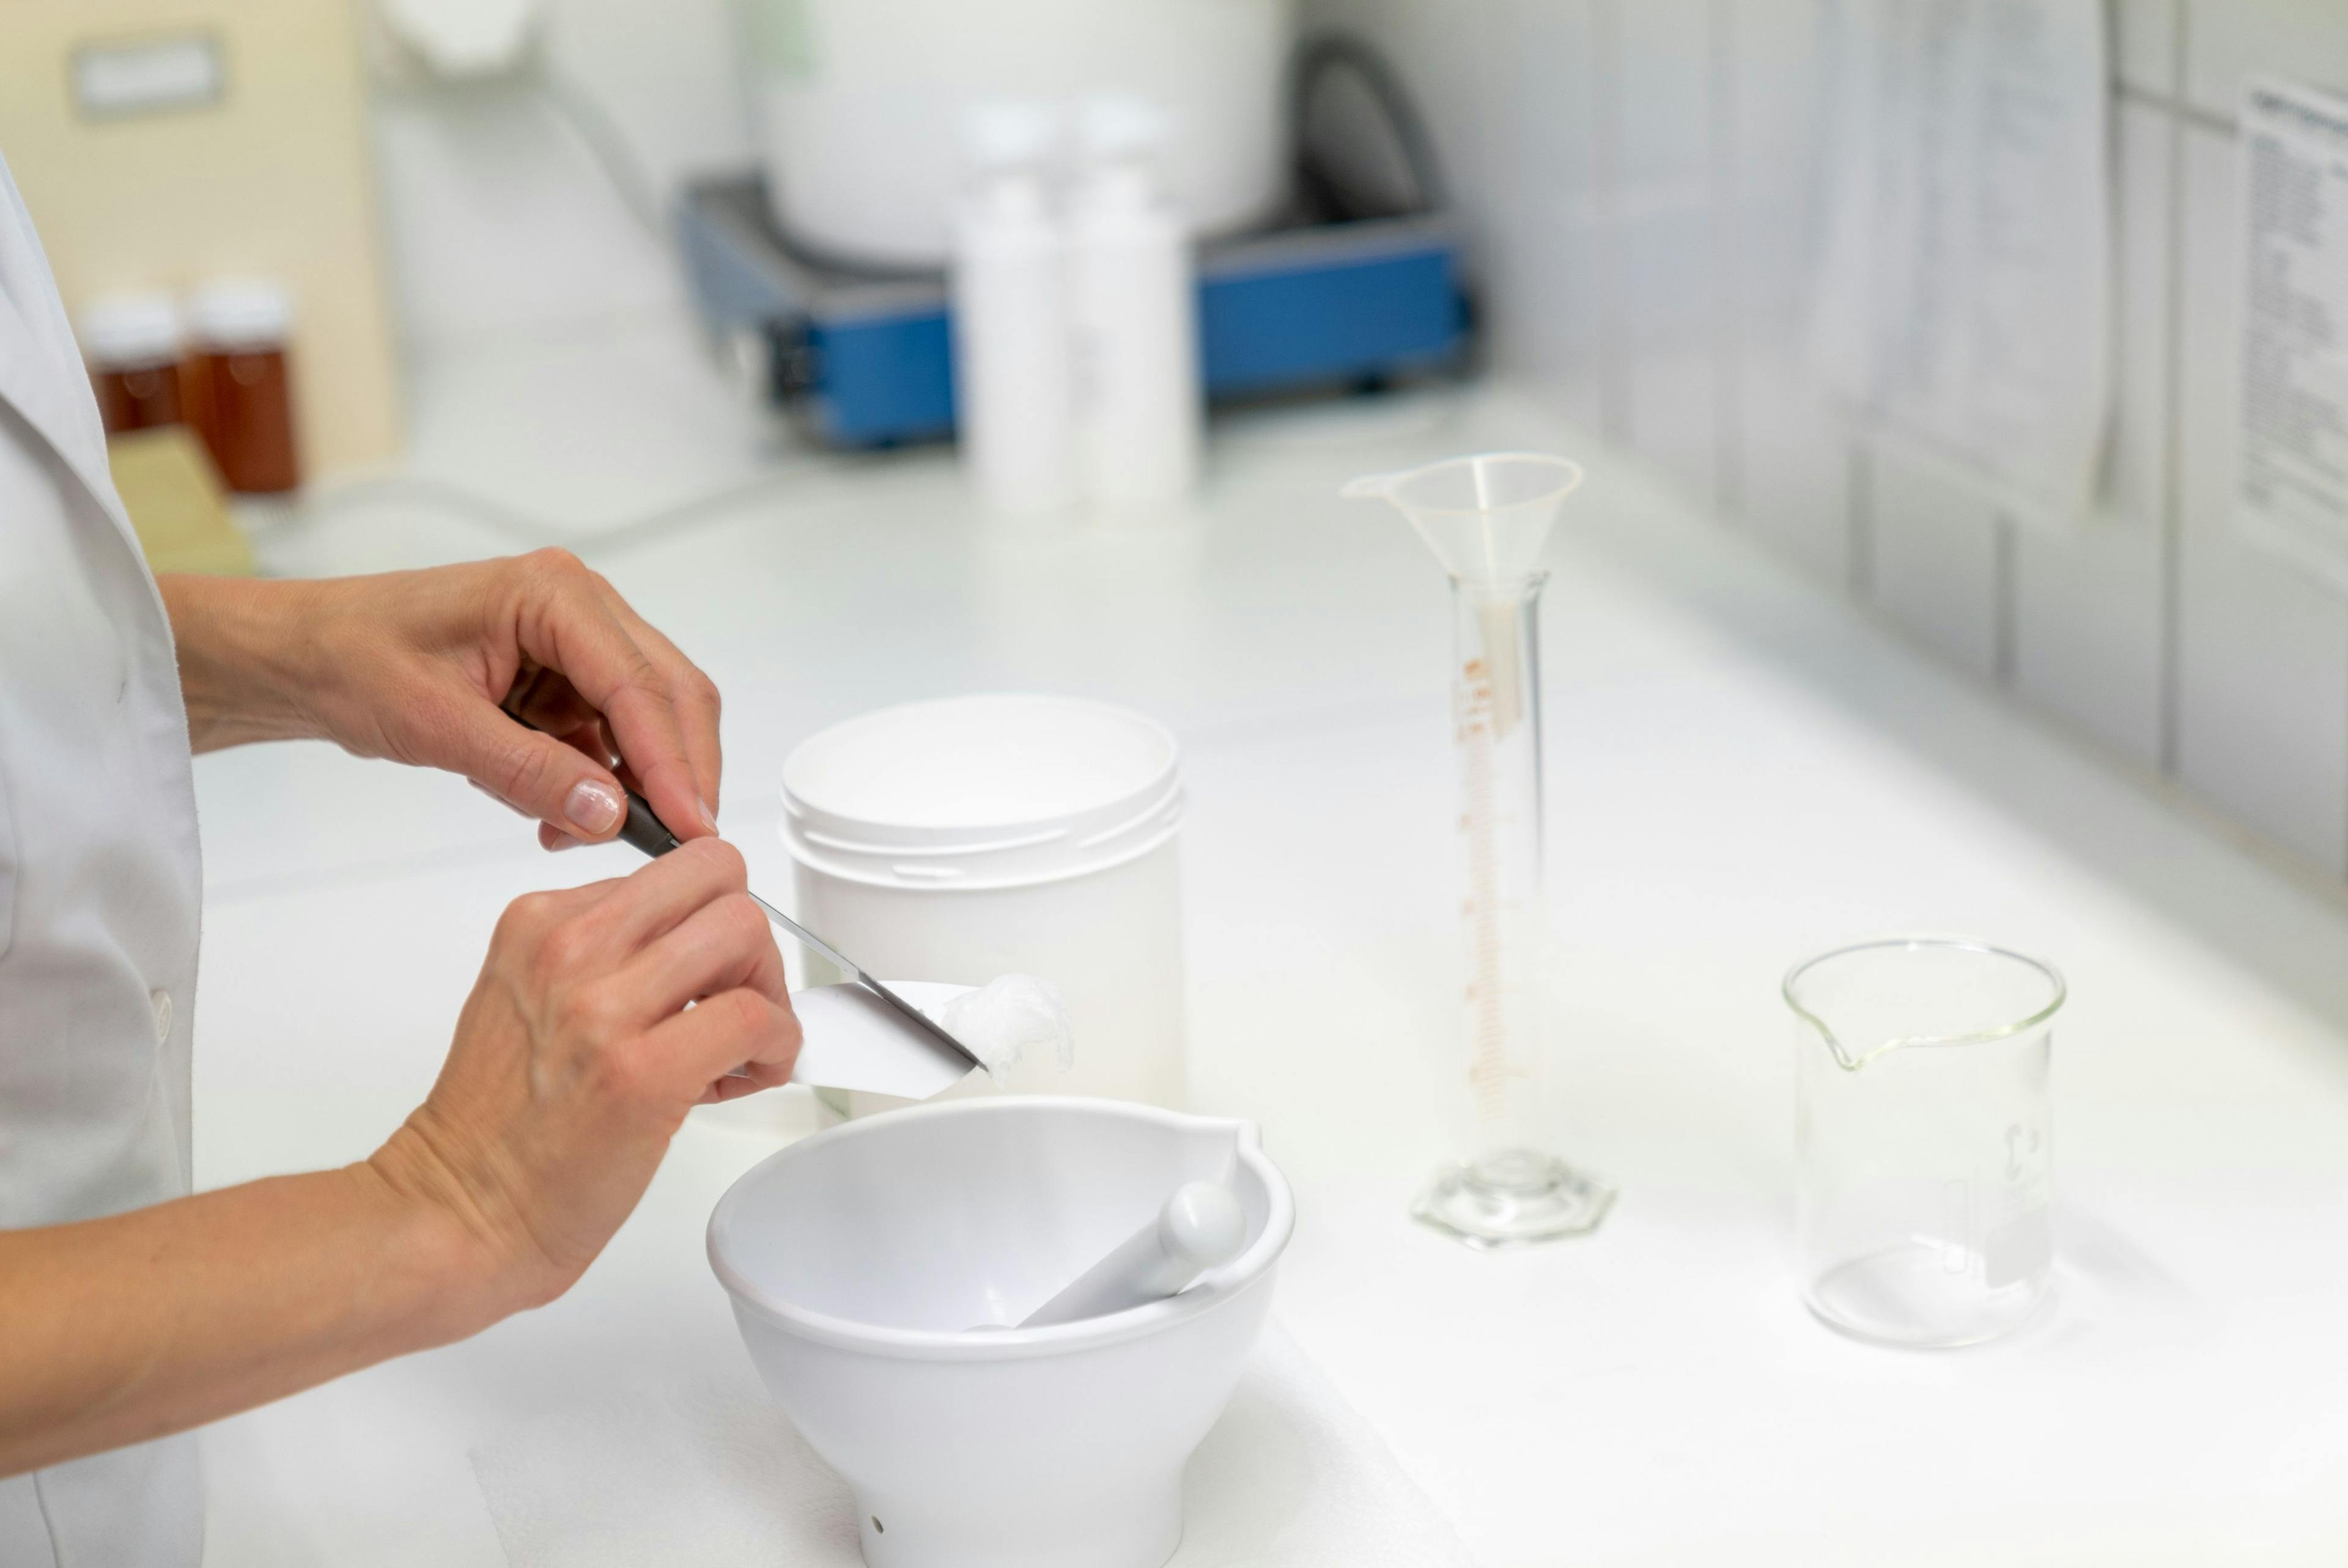 Pharmacist in the laboratory mixing an ointment in a bowl